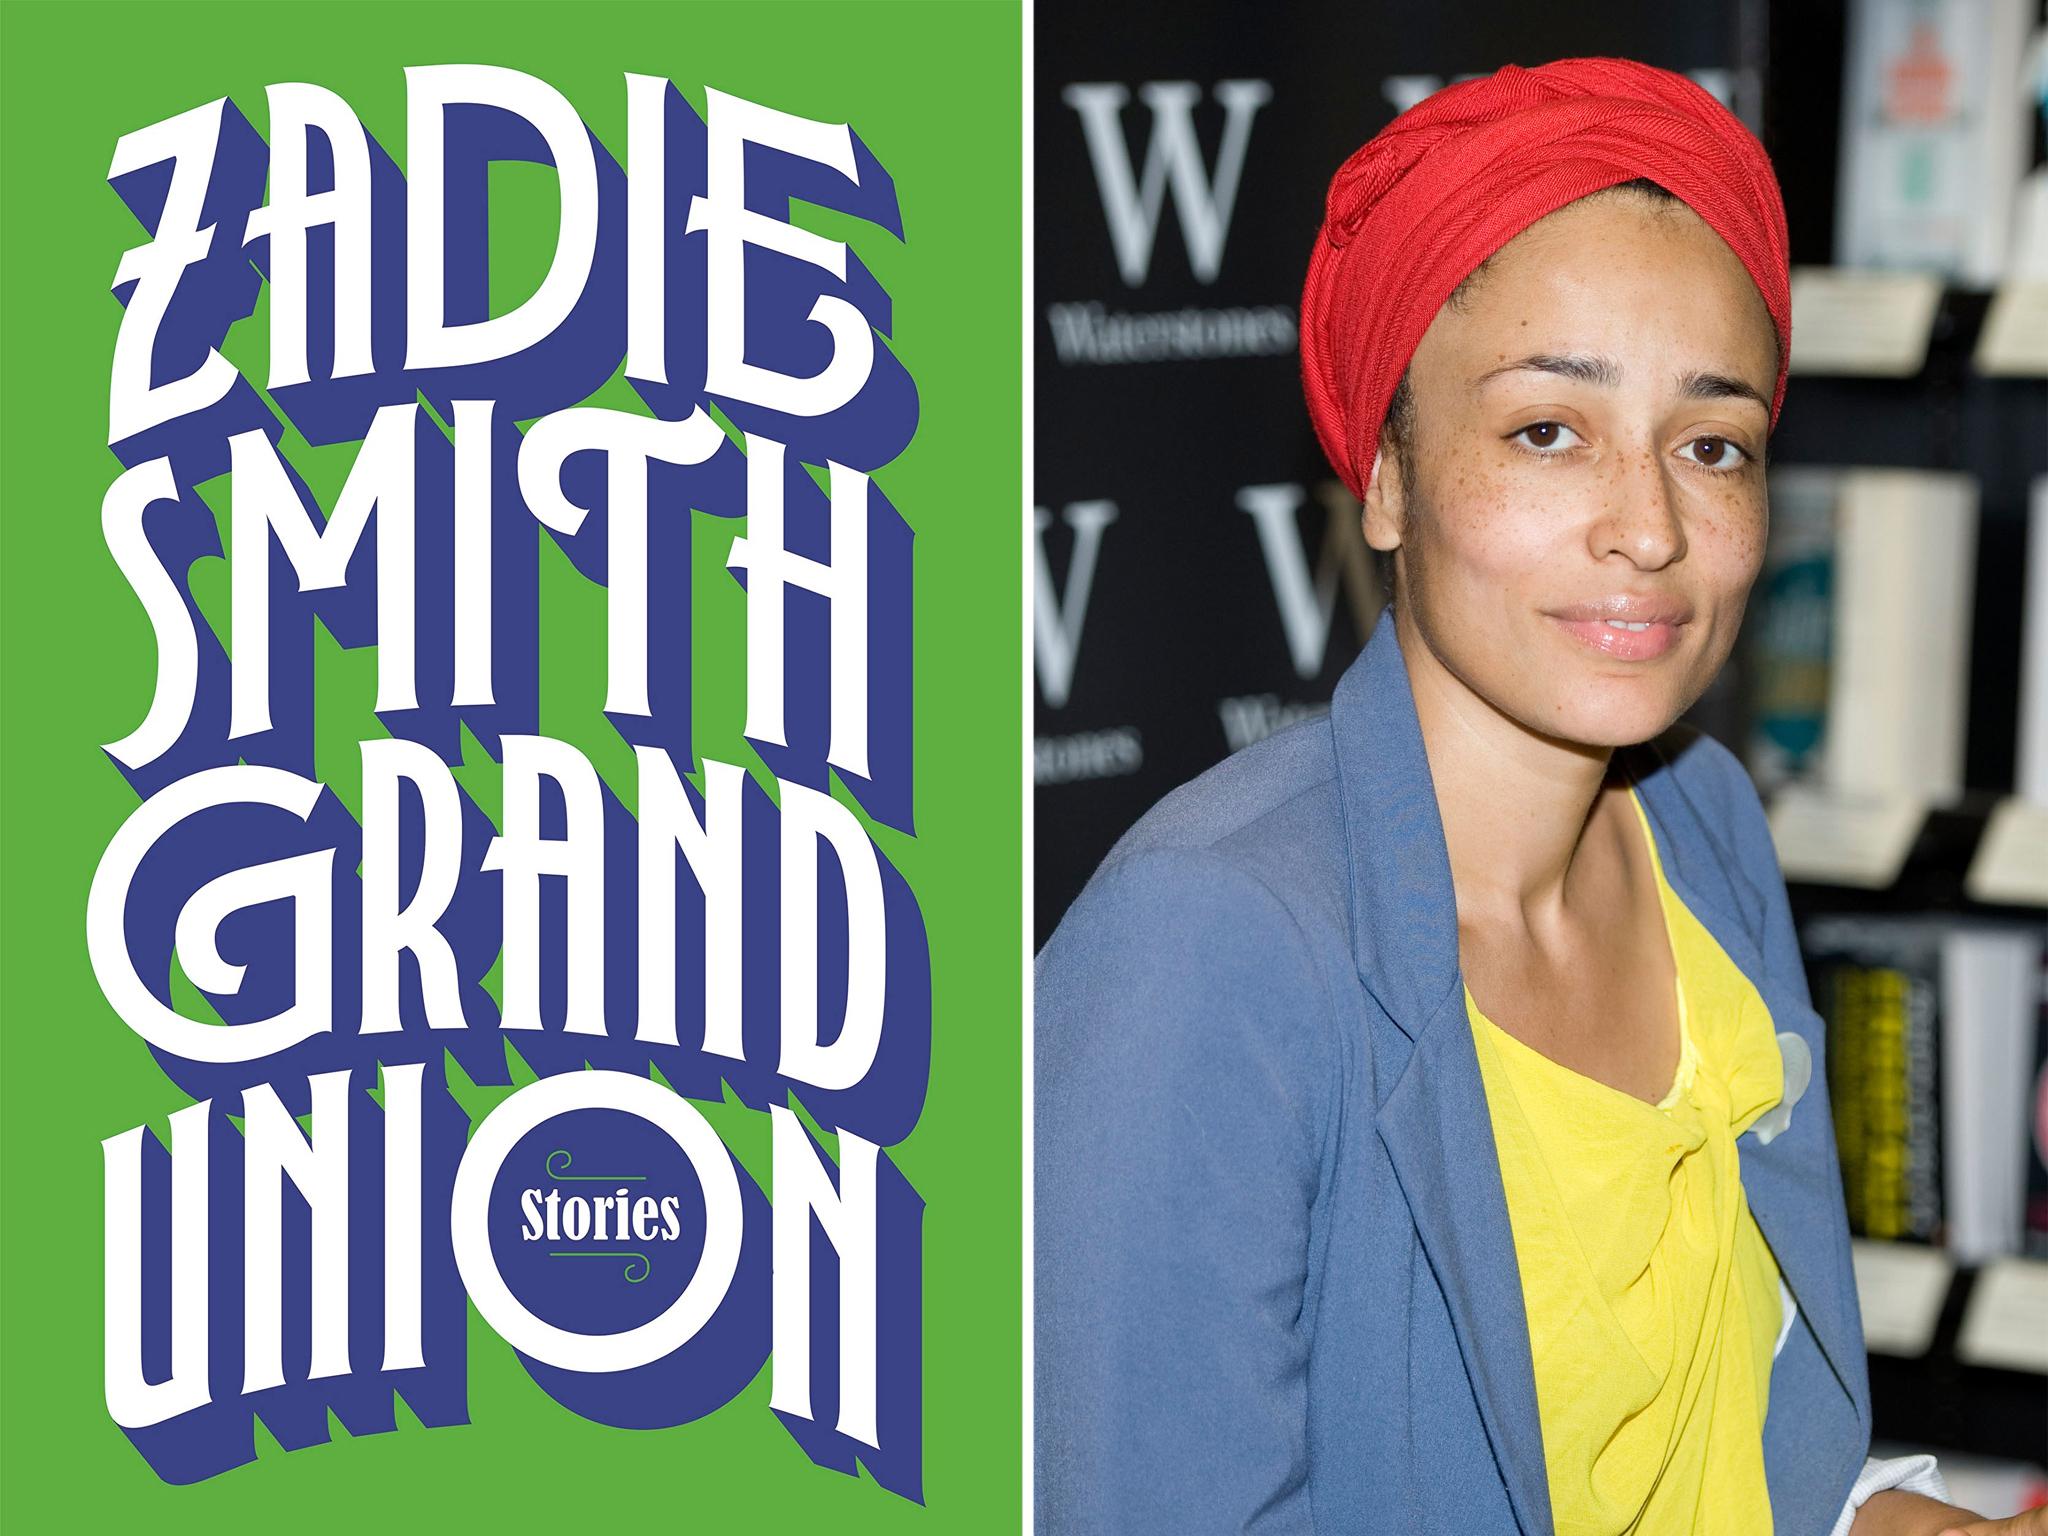 Zadie Smith’s dialogue crackles with mordant wit in her collection of 19 stories